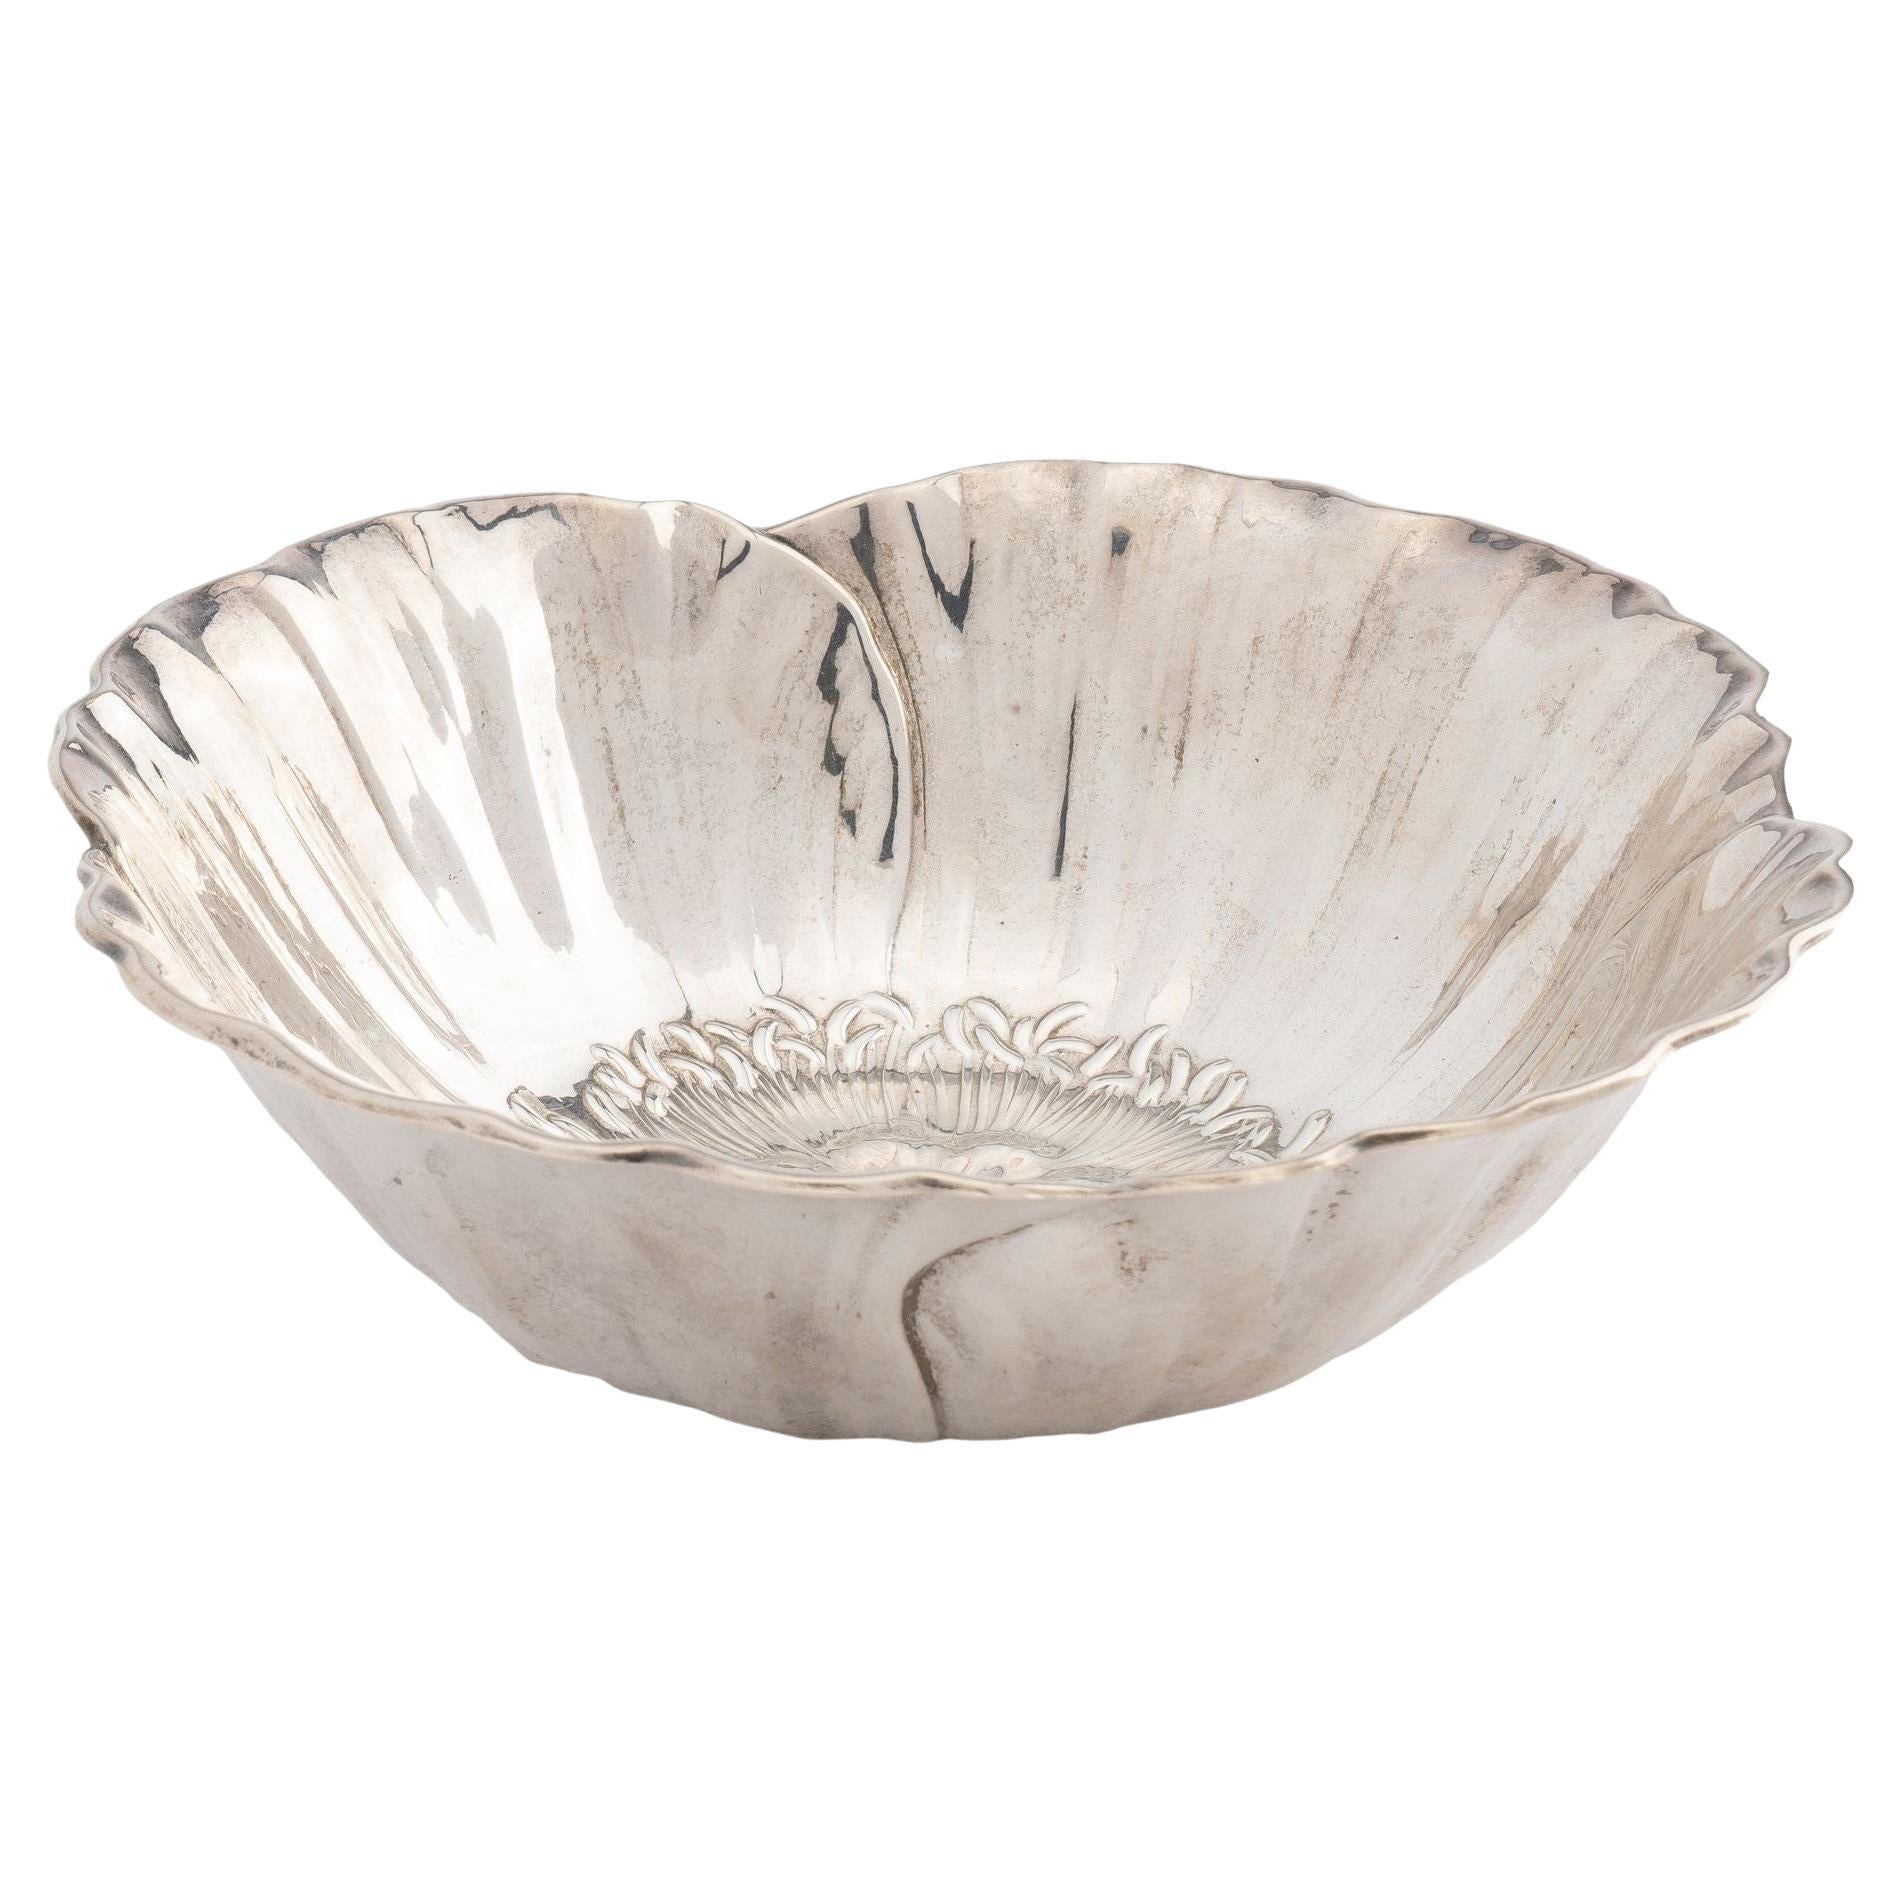 Hand-Hammered Sterling Silver Bowl by Meriden Britannia Co '1893' For Sale